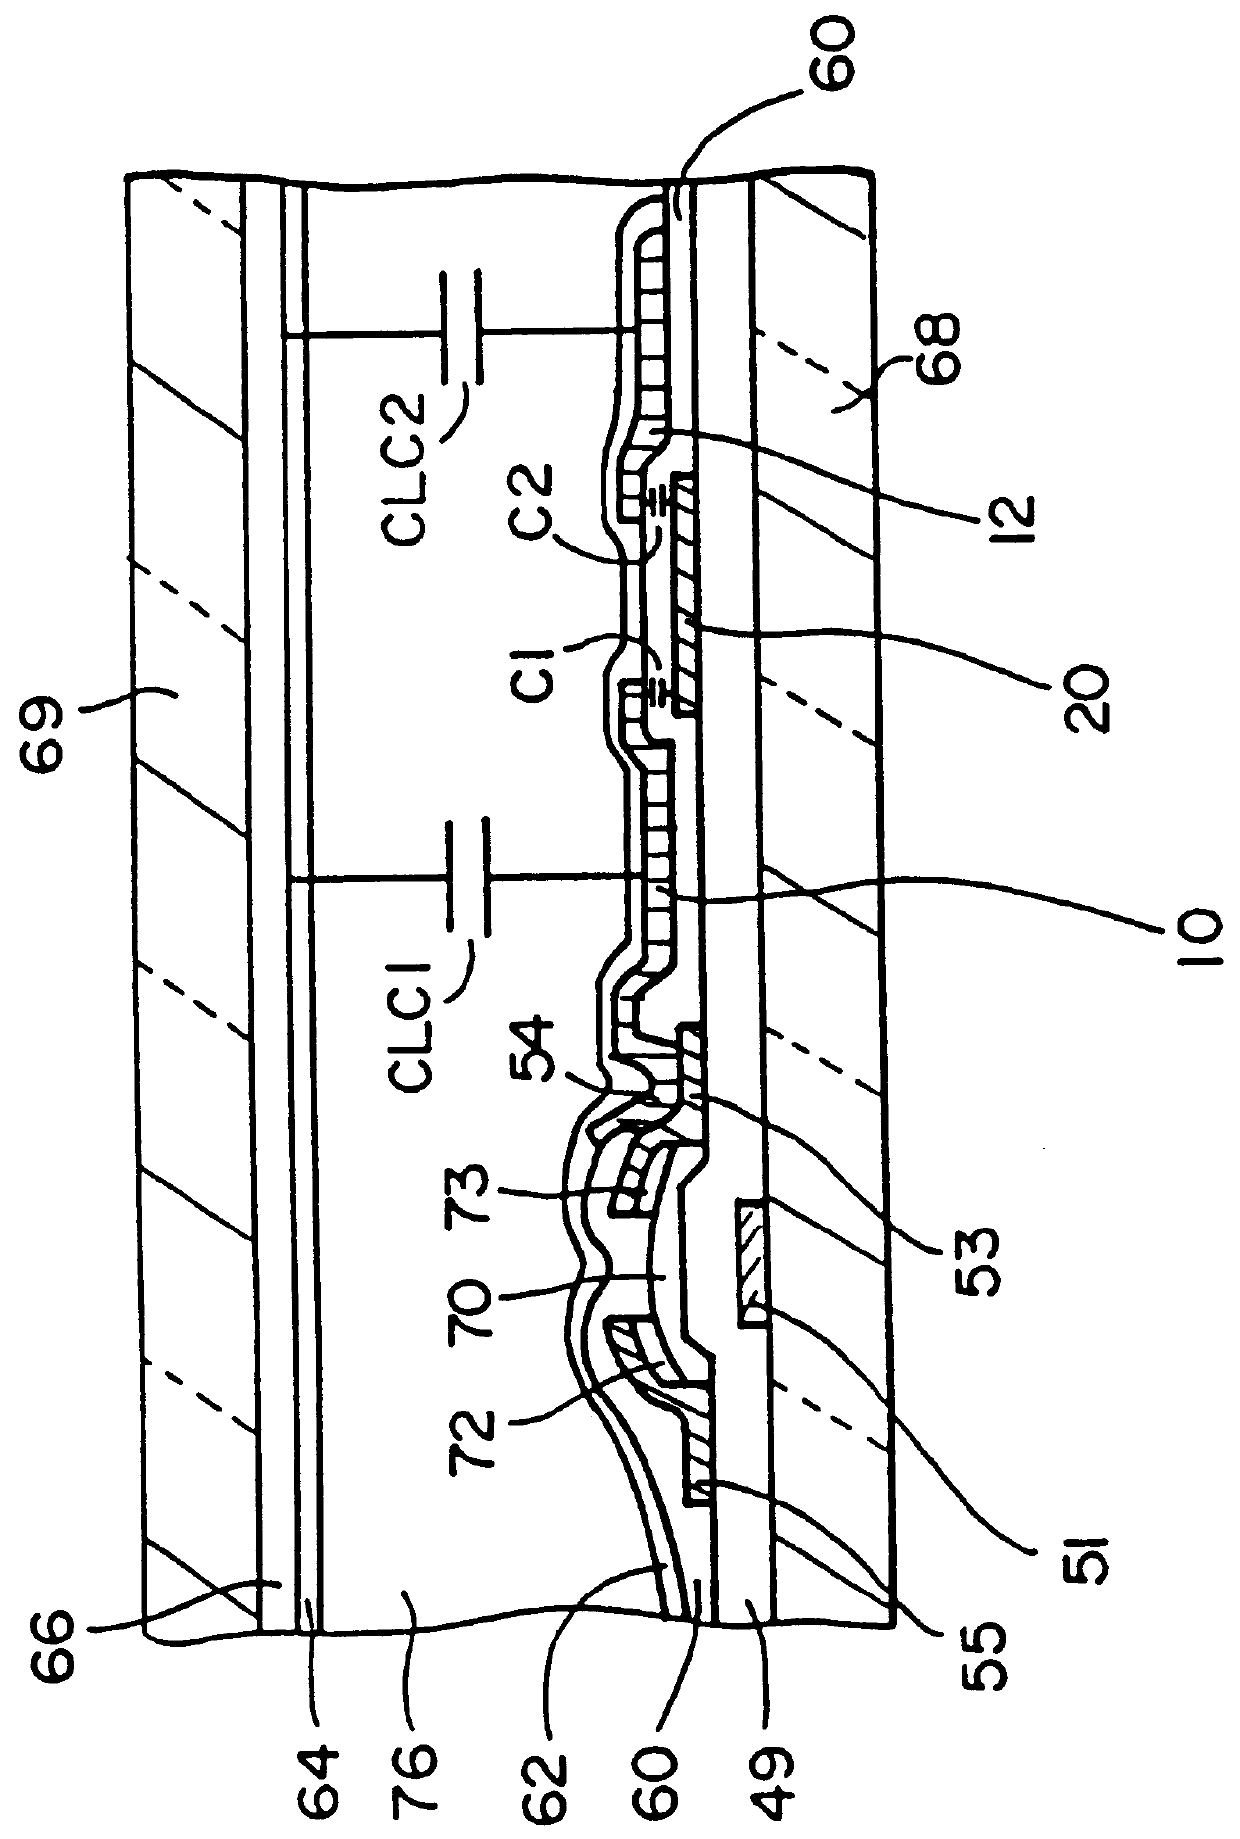 Liquid crystal display with sub-pixel electrodes, and control capacitor electrodes forming control capacitors